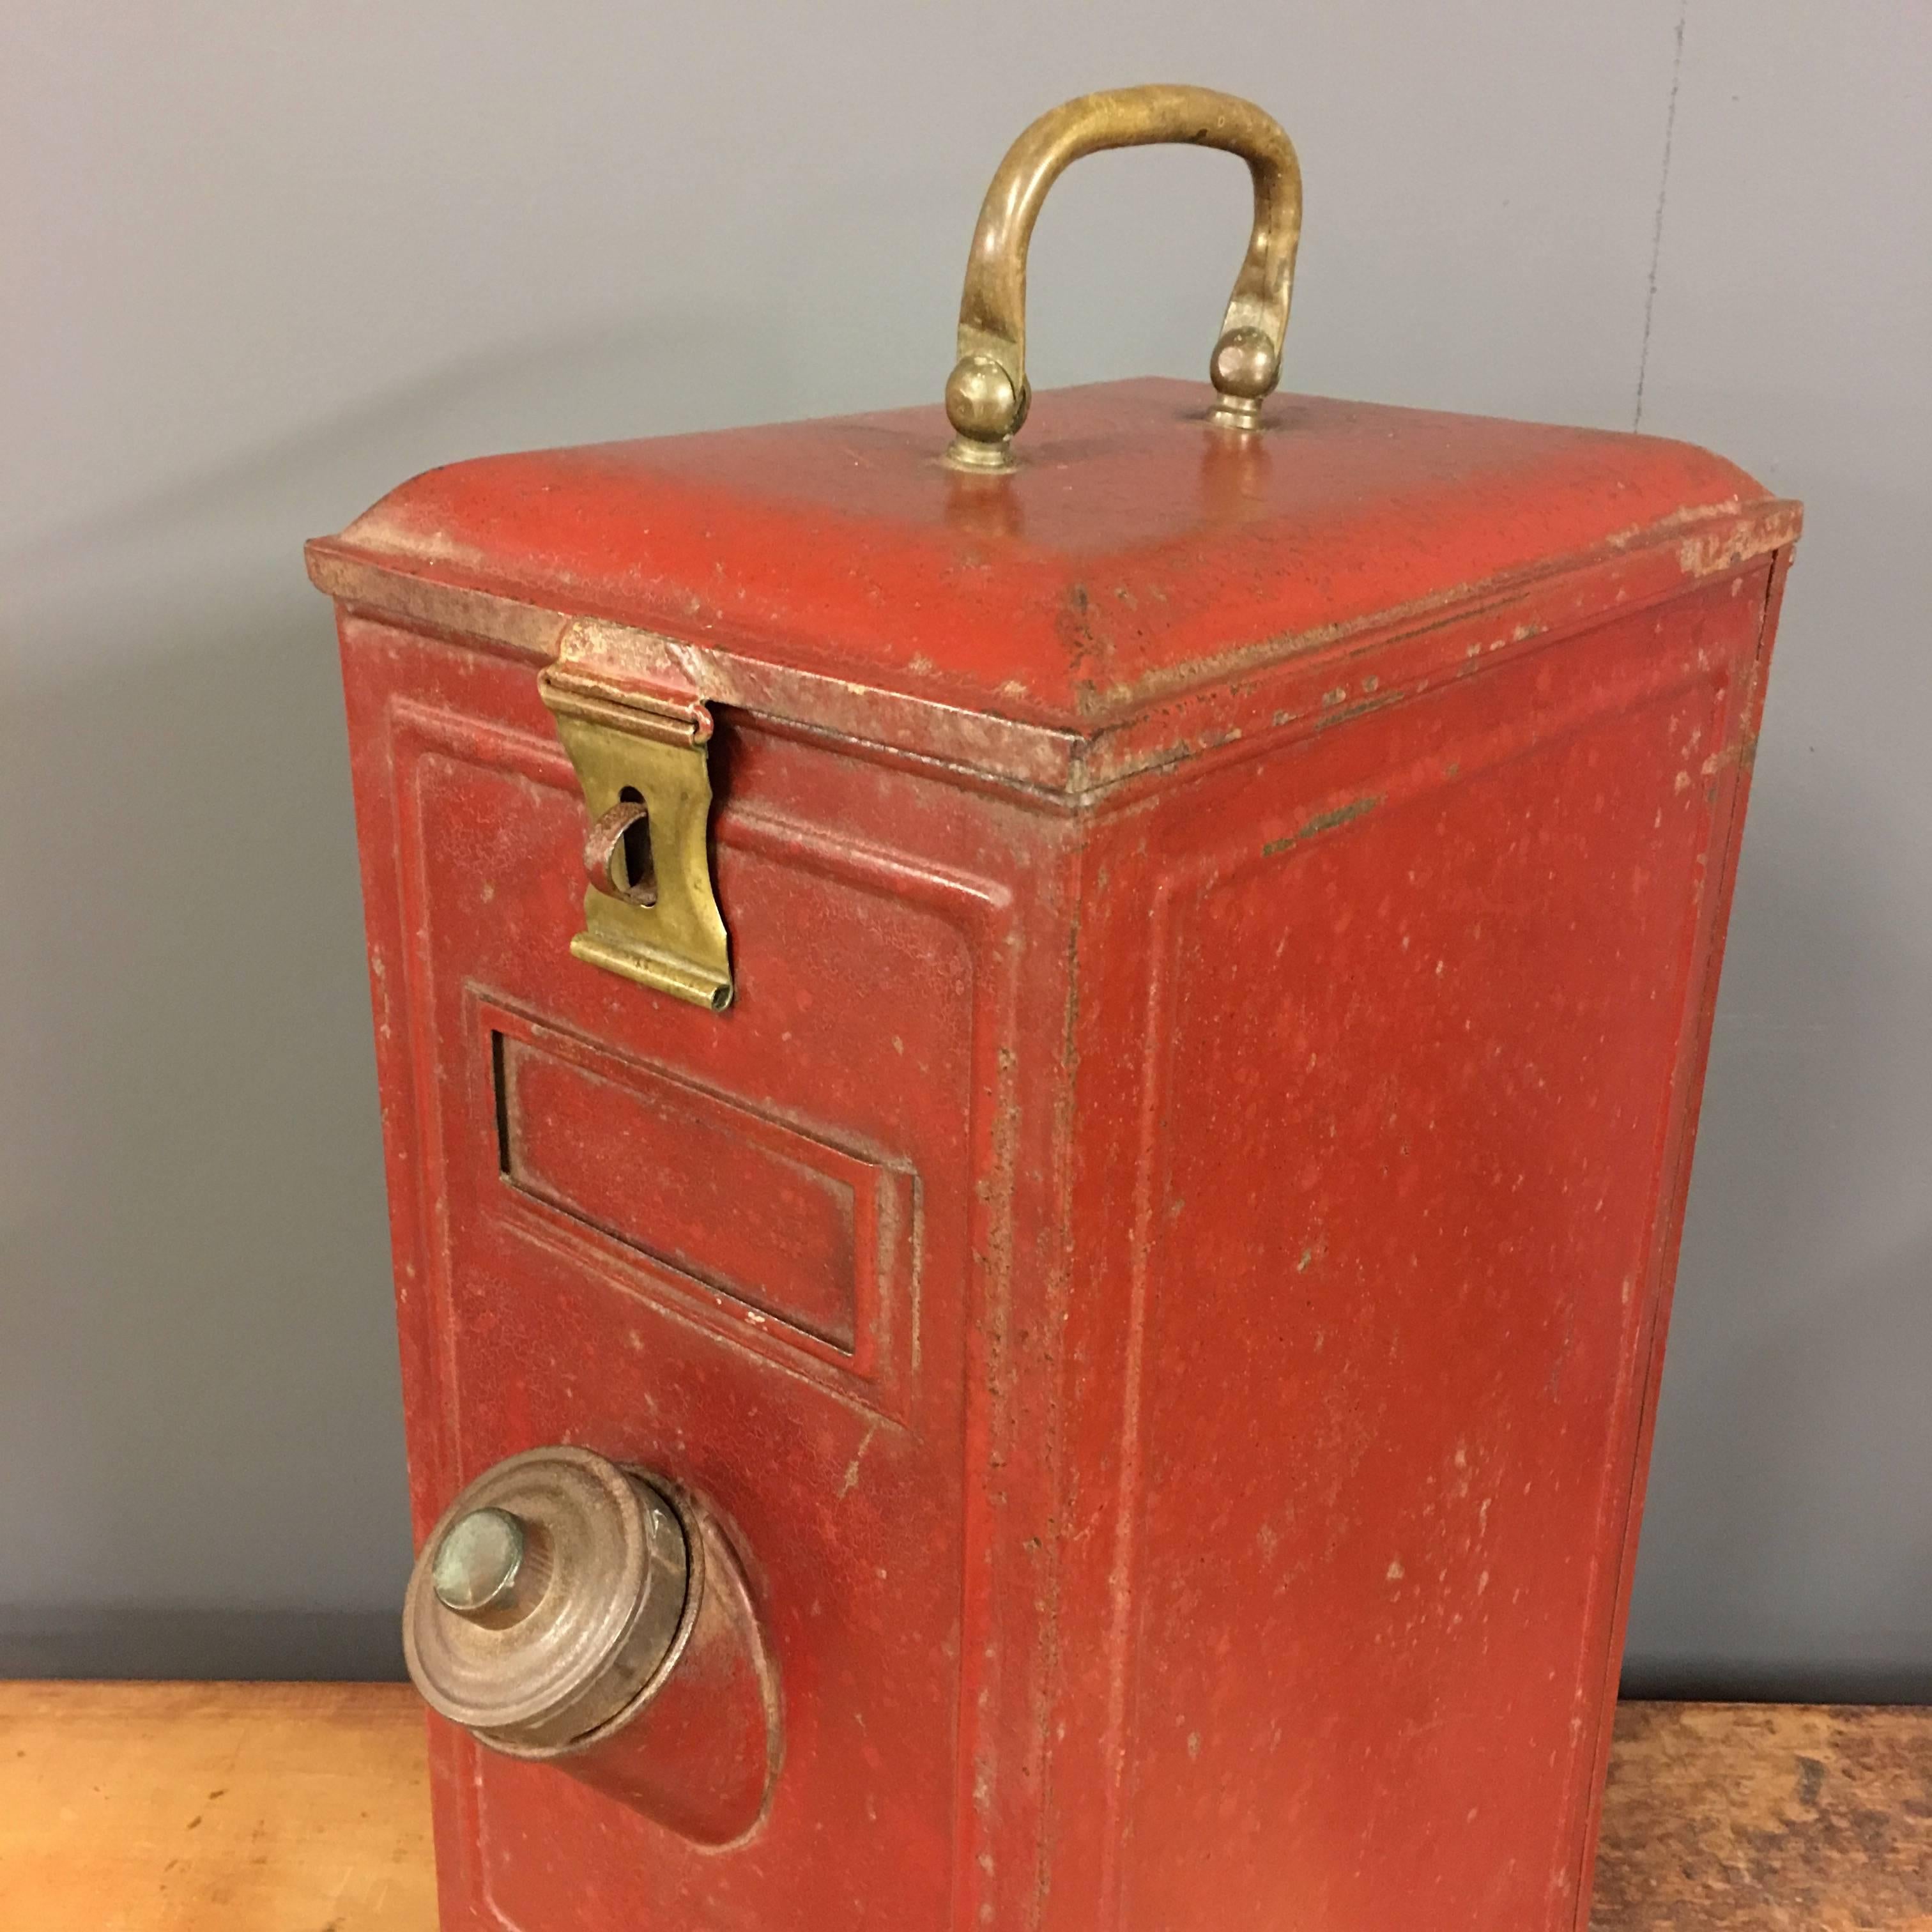 Antique red tin Coffee been dispenser. Made in German during the 1930s. Brass detail and original paint. This item is in good condition.